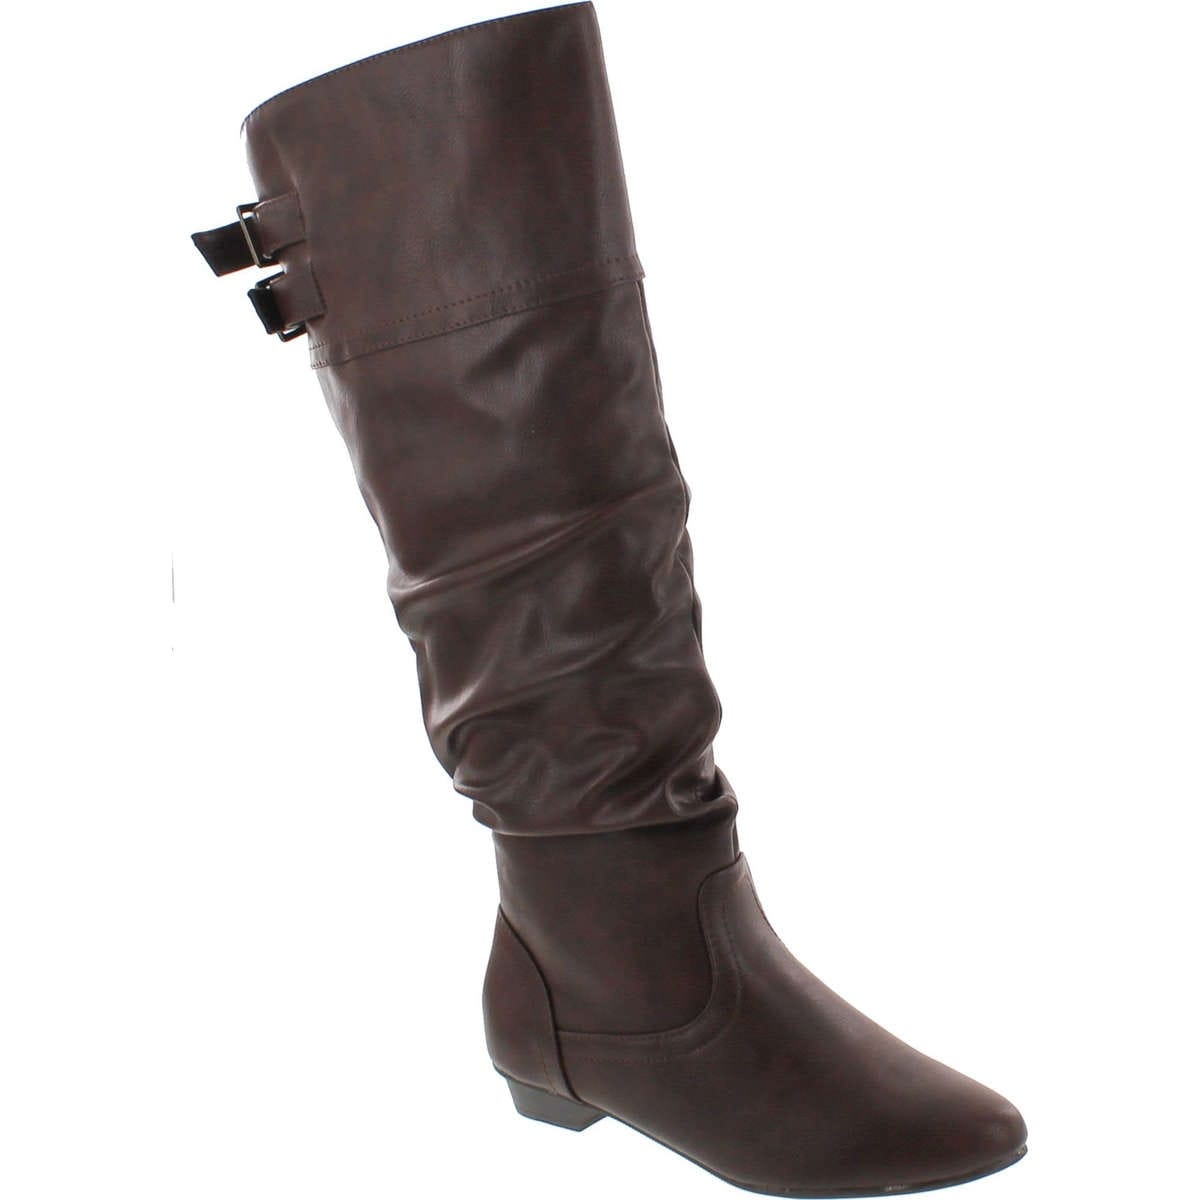 slouchy riding boots